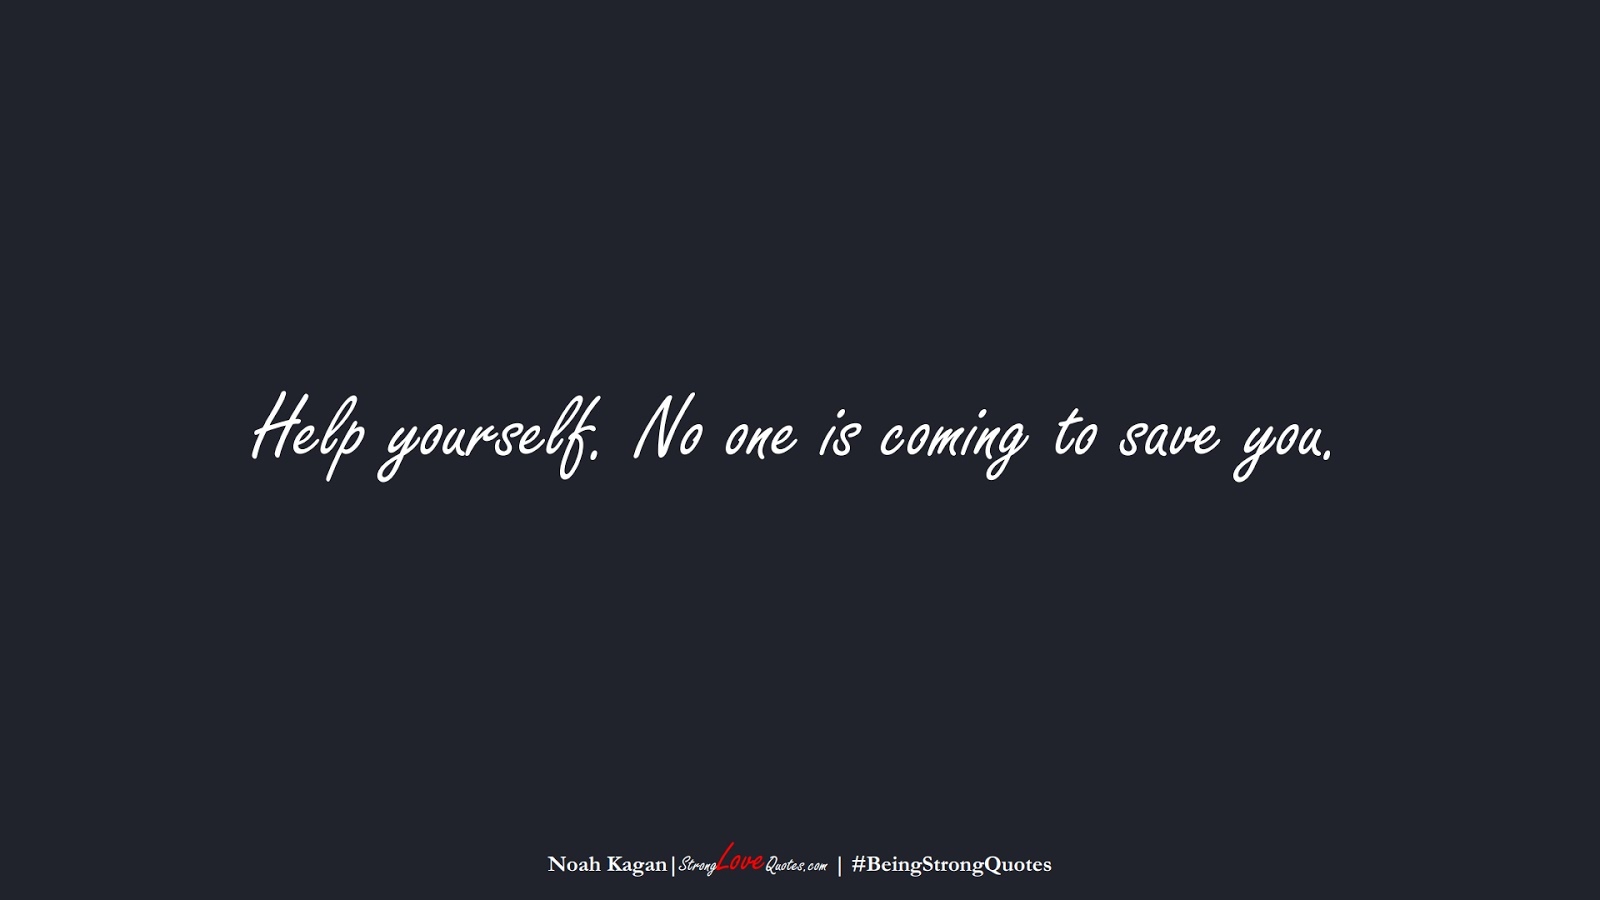 Help yourself. No one is coming to save you. (Noah Kagan);  #BeingStrongQuotes